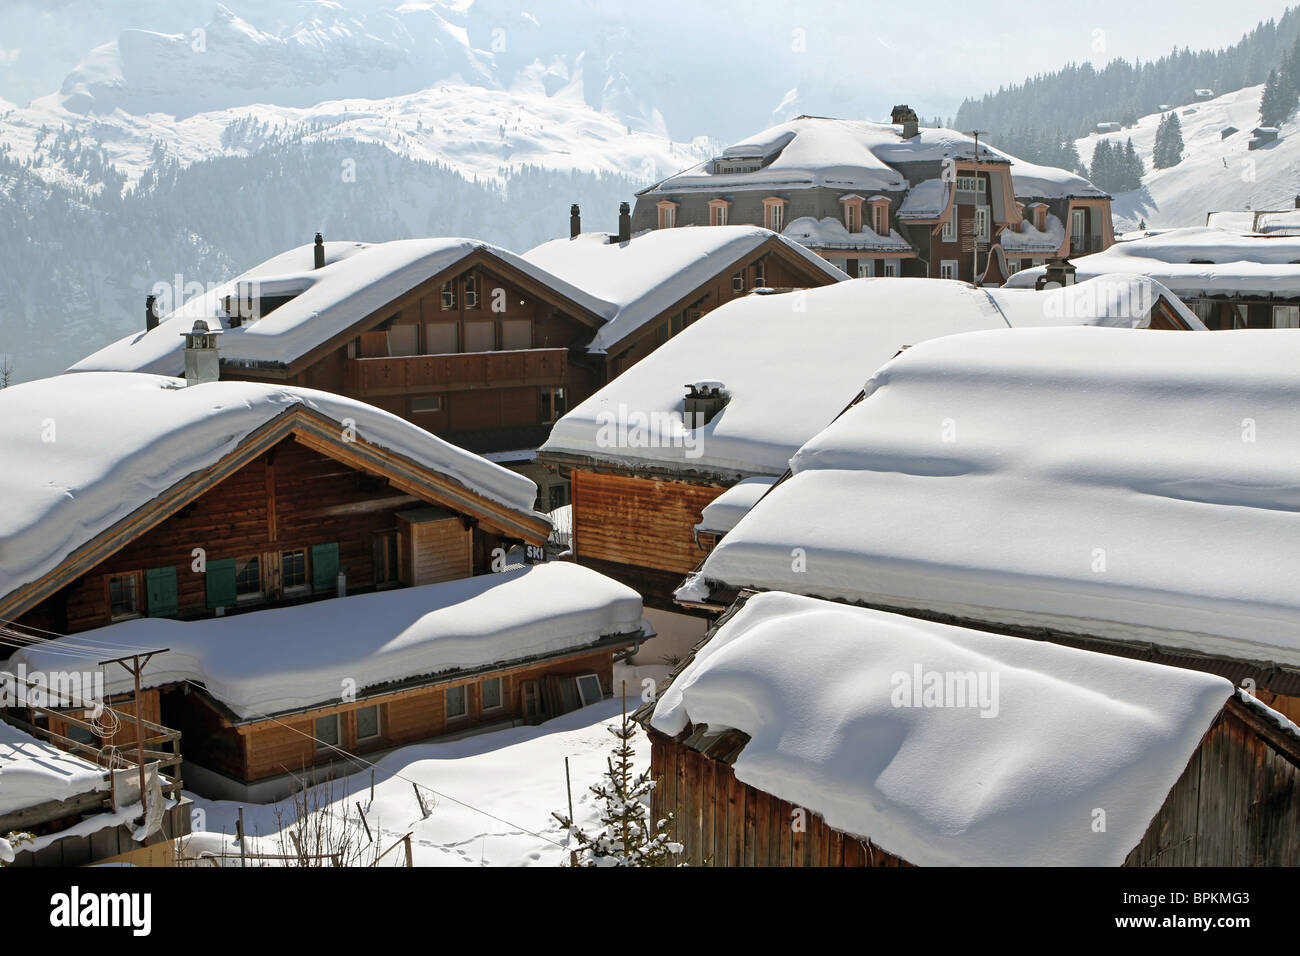 The snow capped roofs of the chalets in the Swiss Alpine town of Murren, Berne Canton, Switzerland. The Bernese Alps. Stock Photo